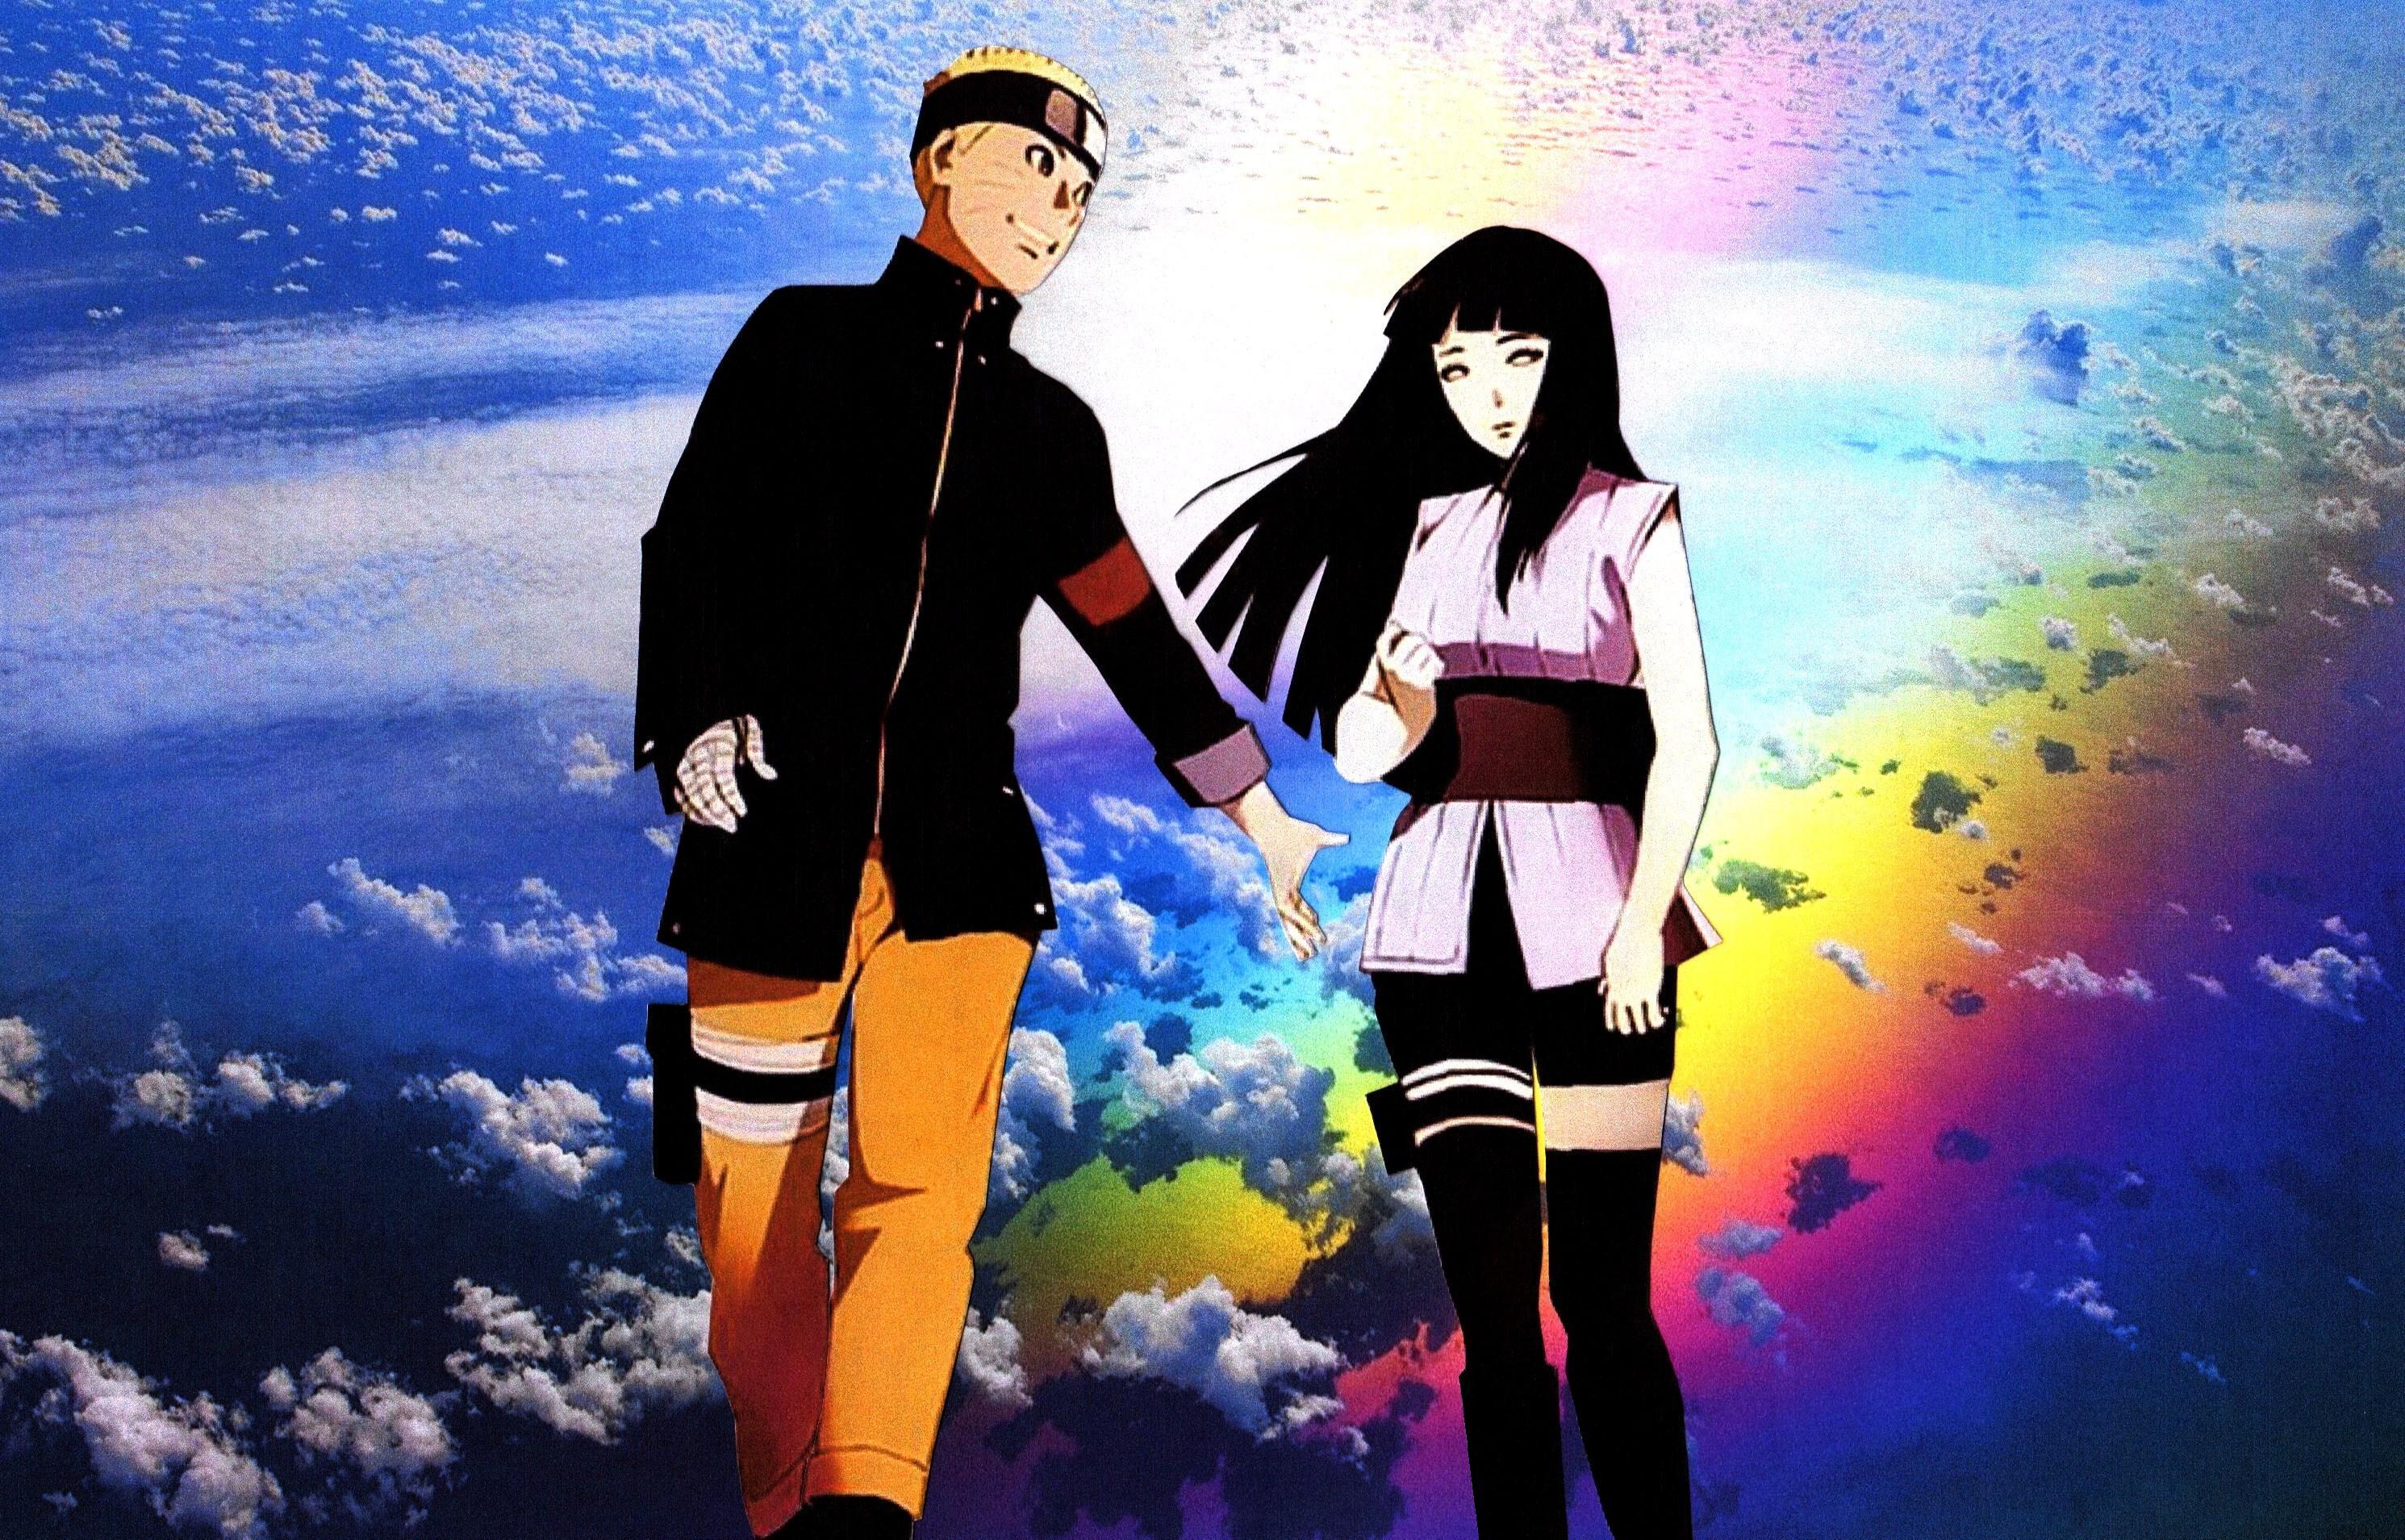 Naruto and Hinata The Last Wallpaper 6 by weissdrum on DeviantArt